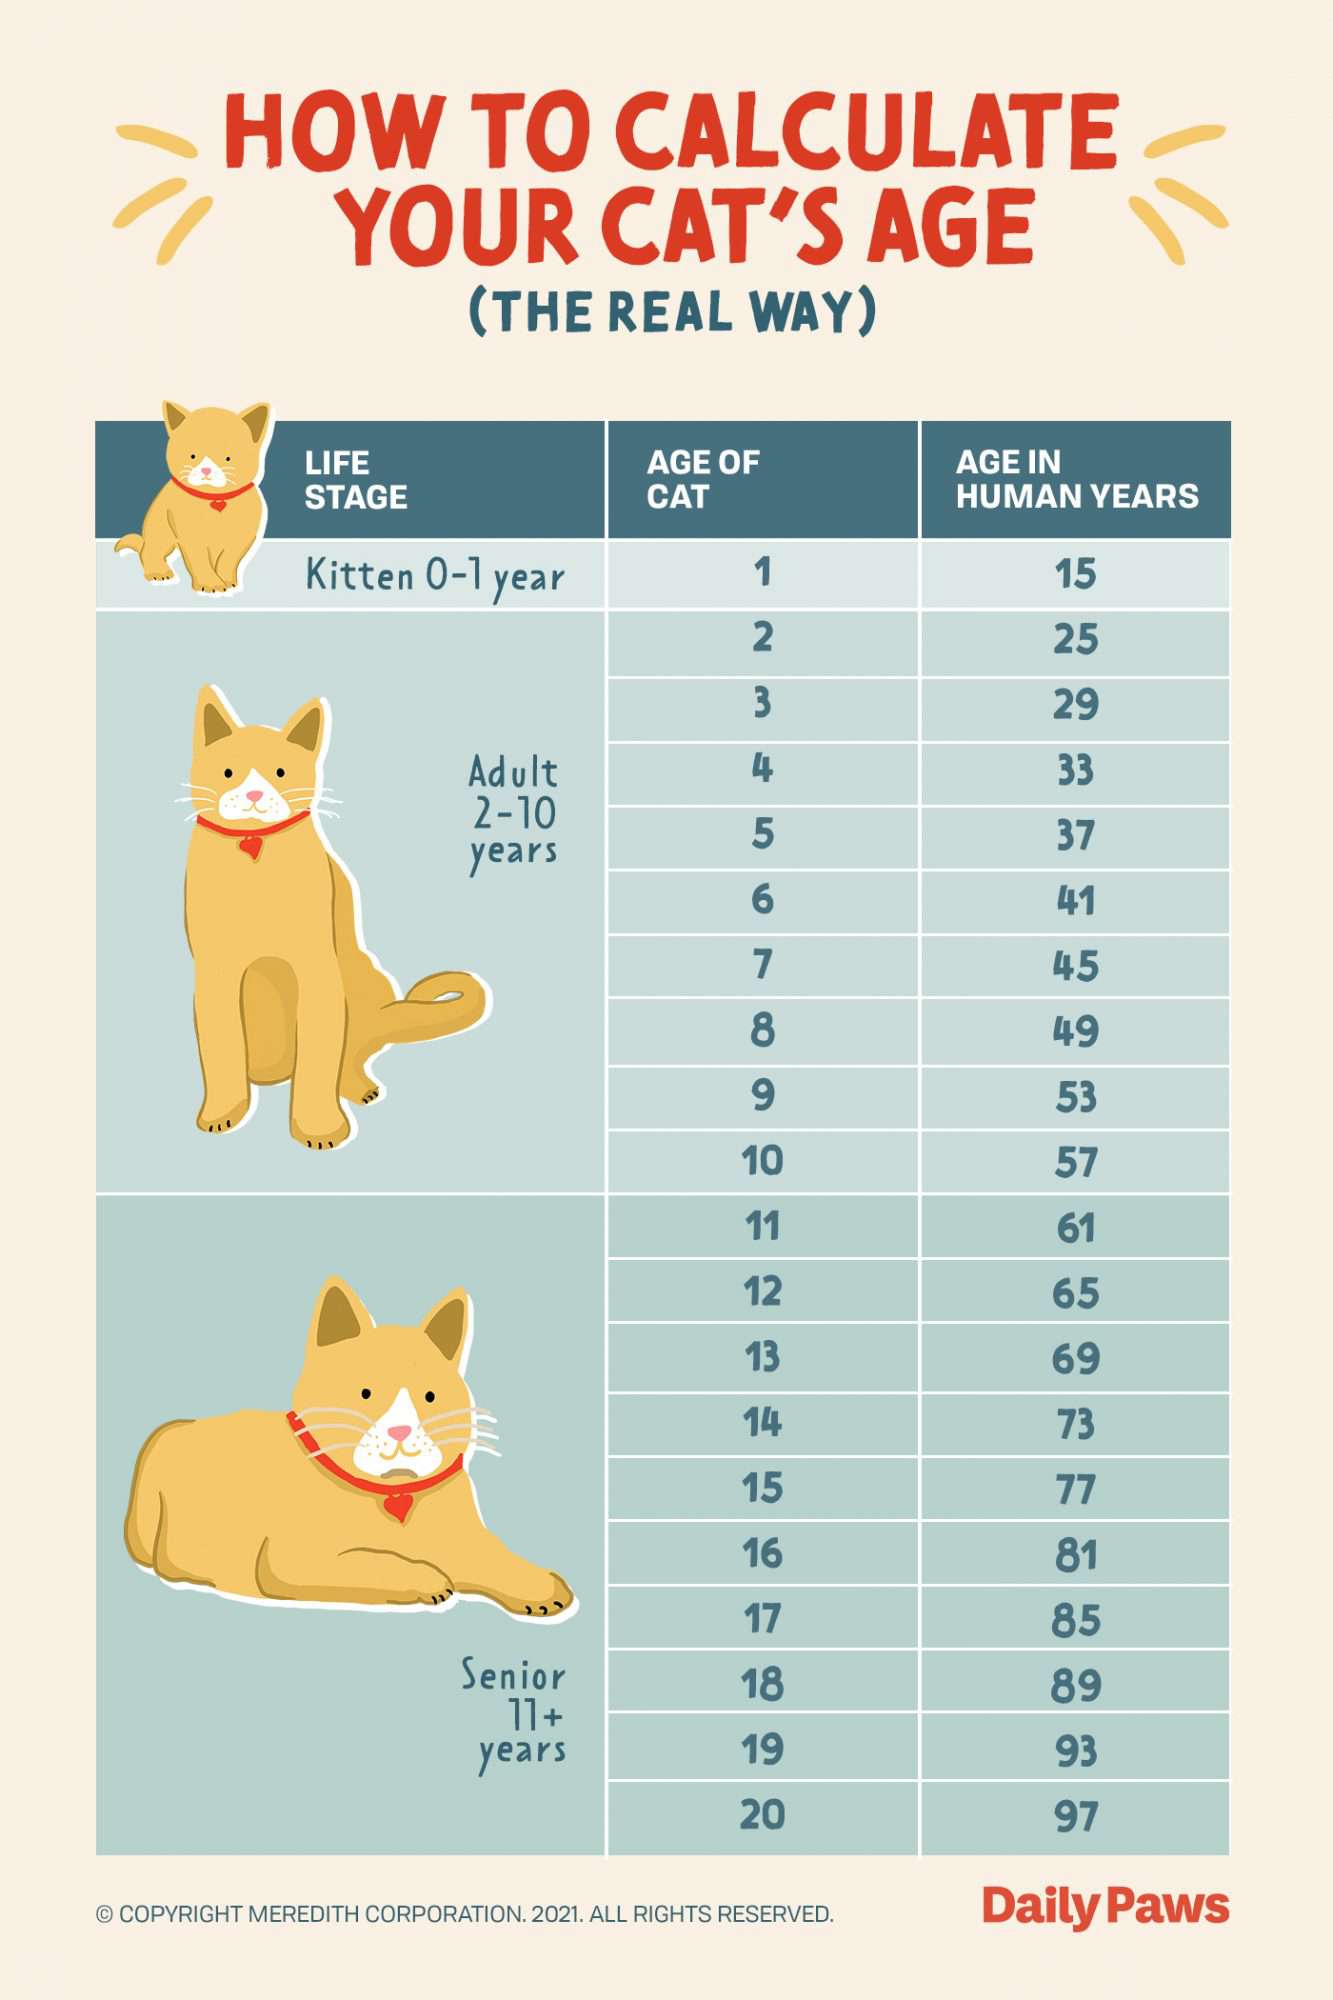 Chart showing different cat ages with coinciding human years equivalent